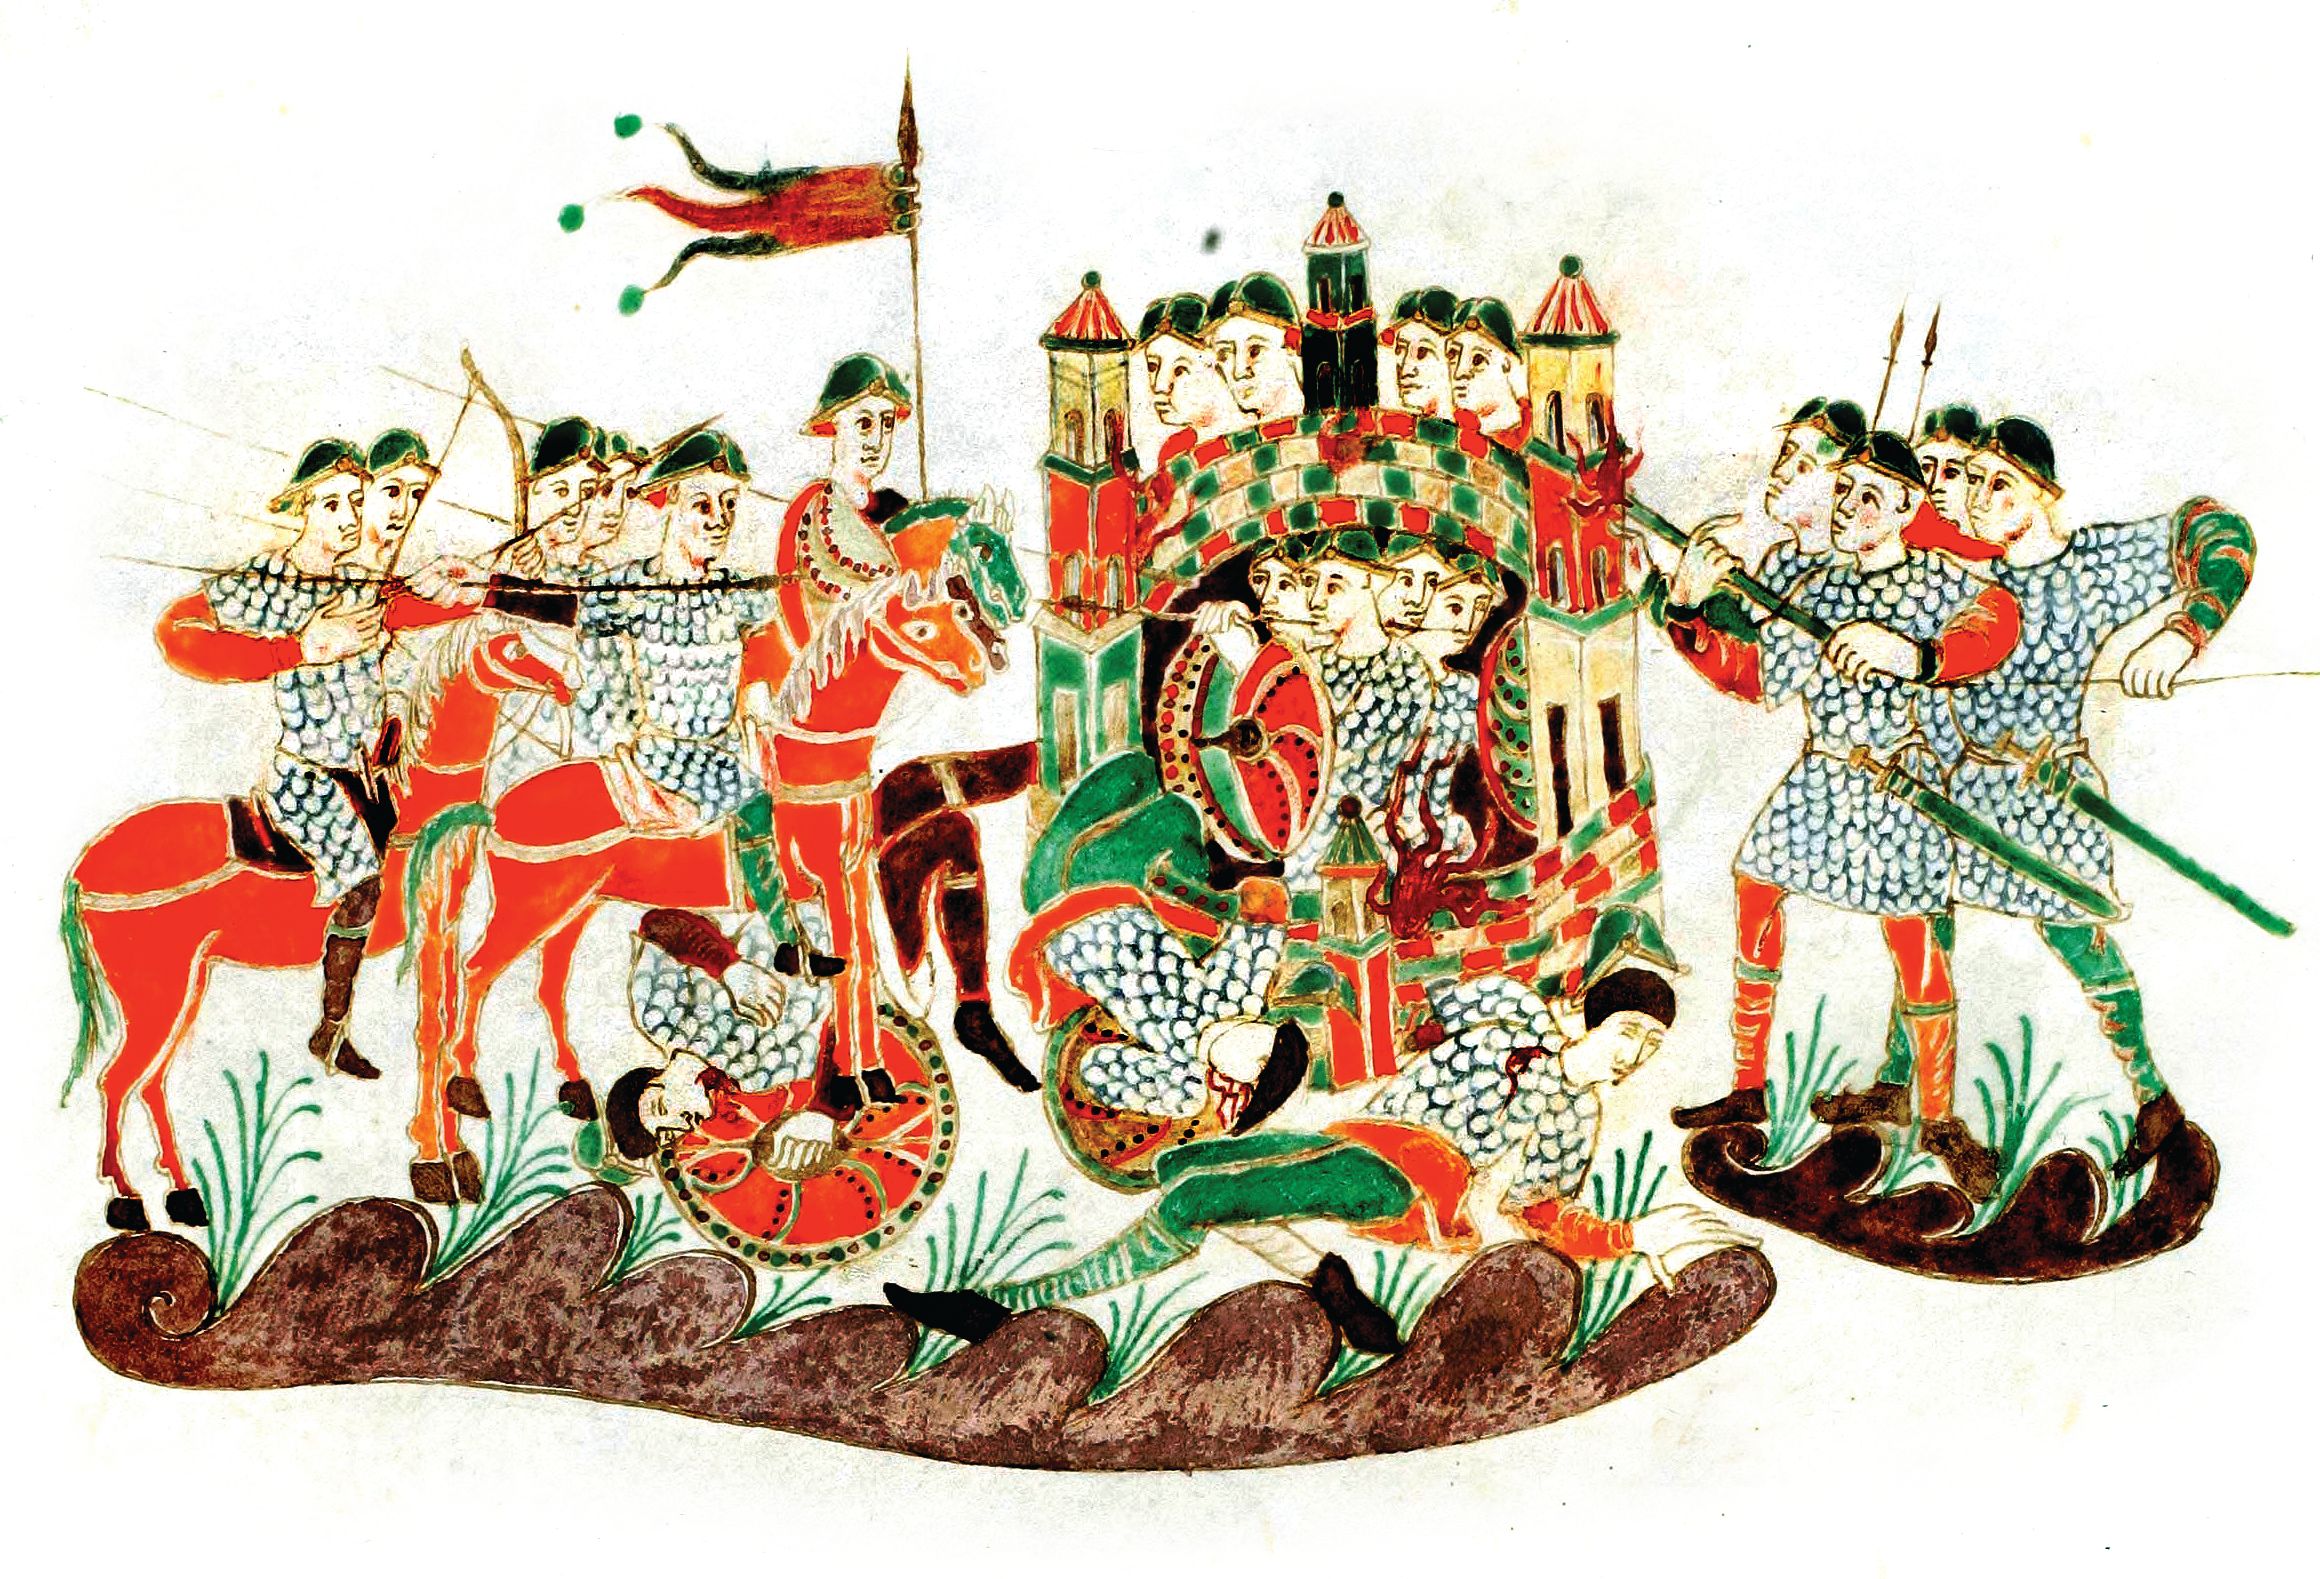 French Carolingian knights besiege a medieval town in this 9th century drawing. When Charlemagne arrived at Saragossa without siege equipment he was unable to force the muslim population to submit. After a month of negotiation, Charlemagne decided to head back to France. 